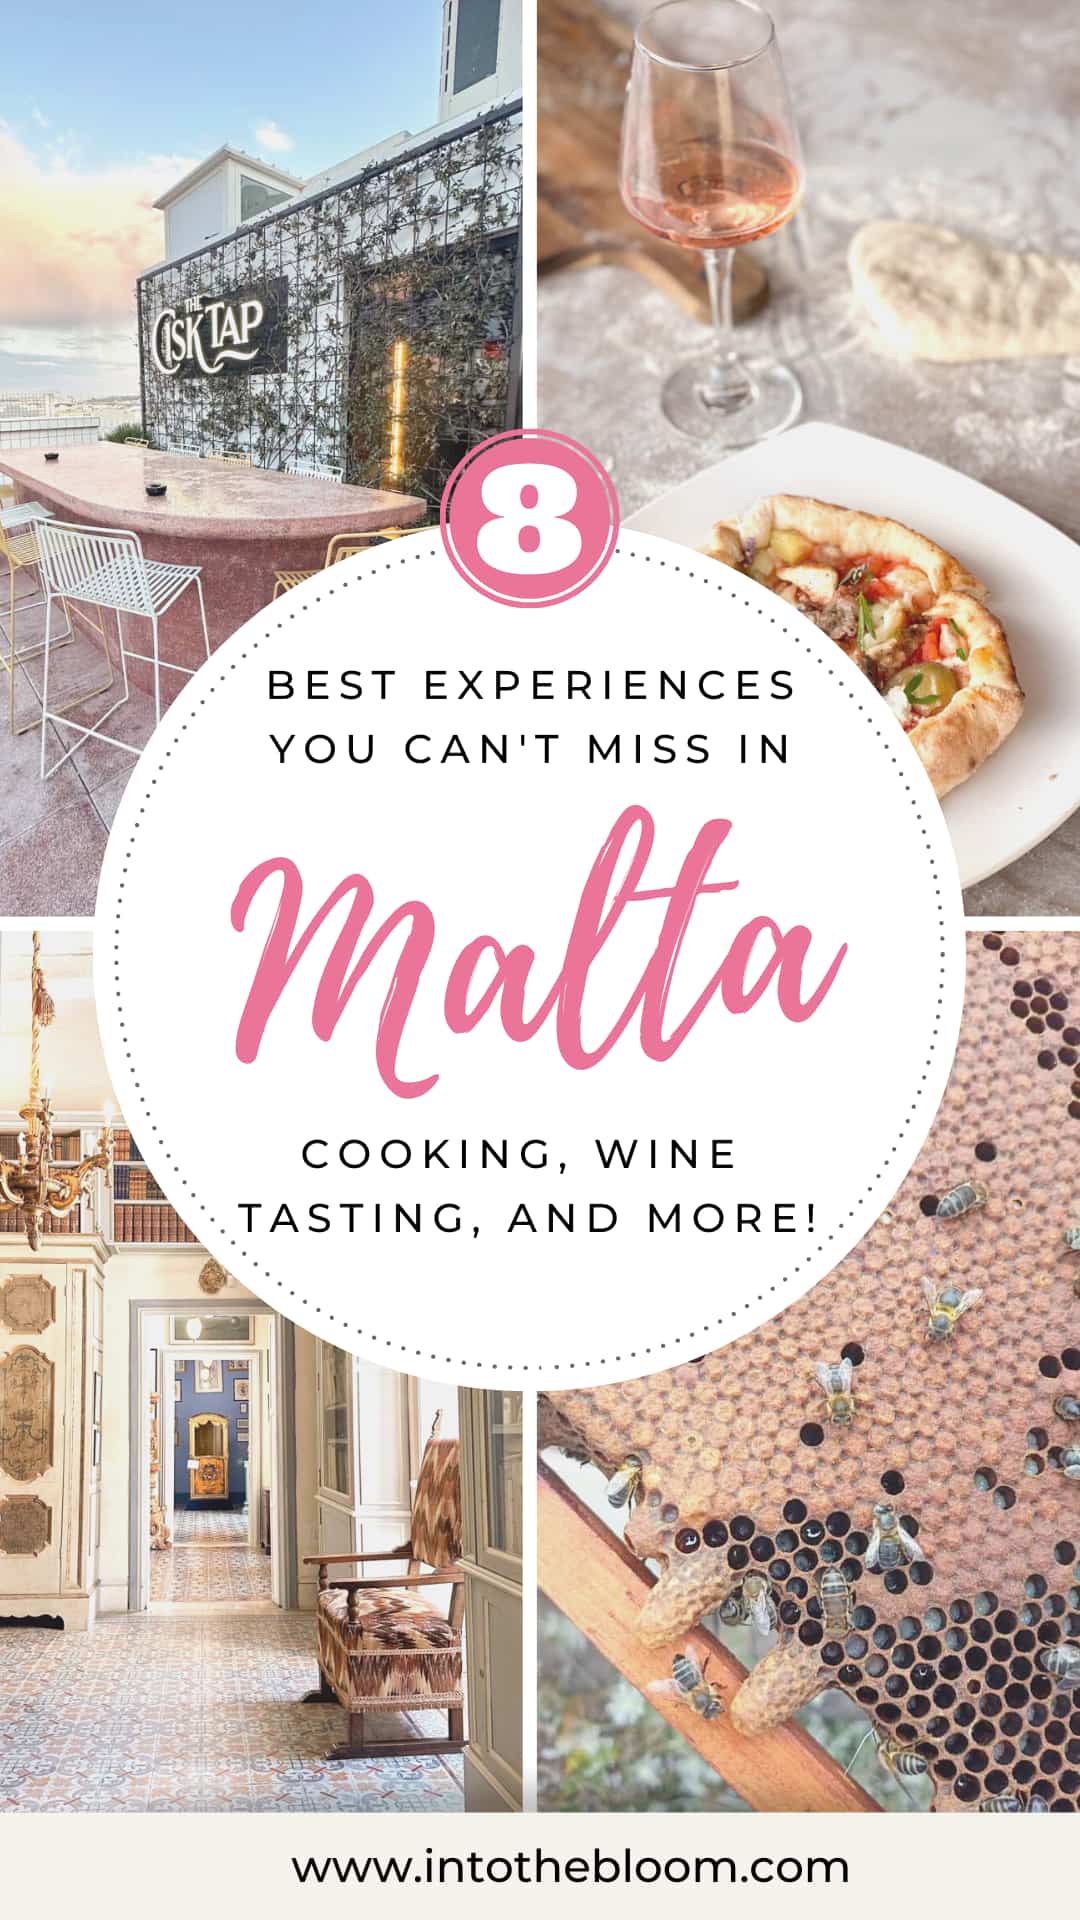 8 unforgettable activities you can't miss in Malta, including cooking, wine tasting, and more